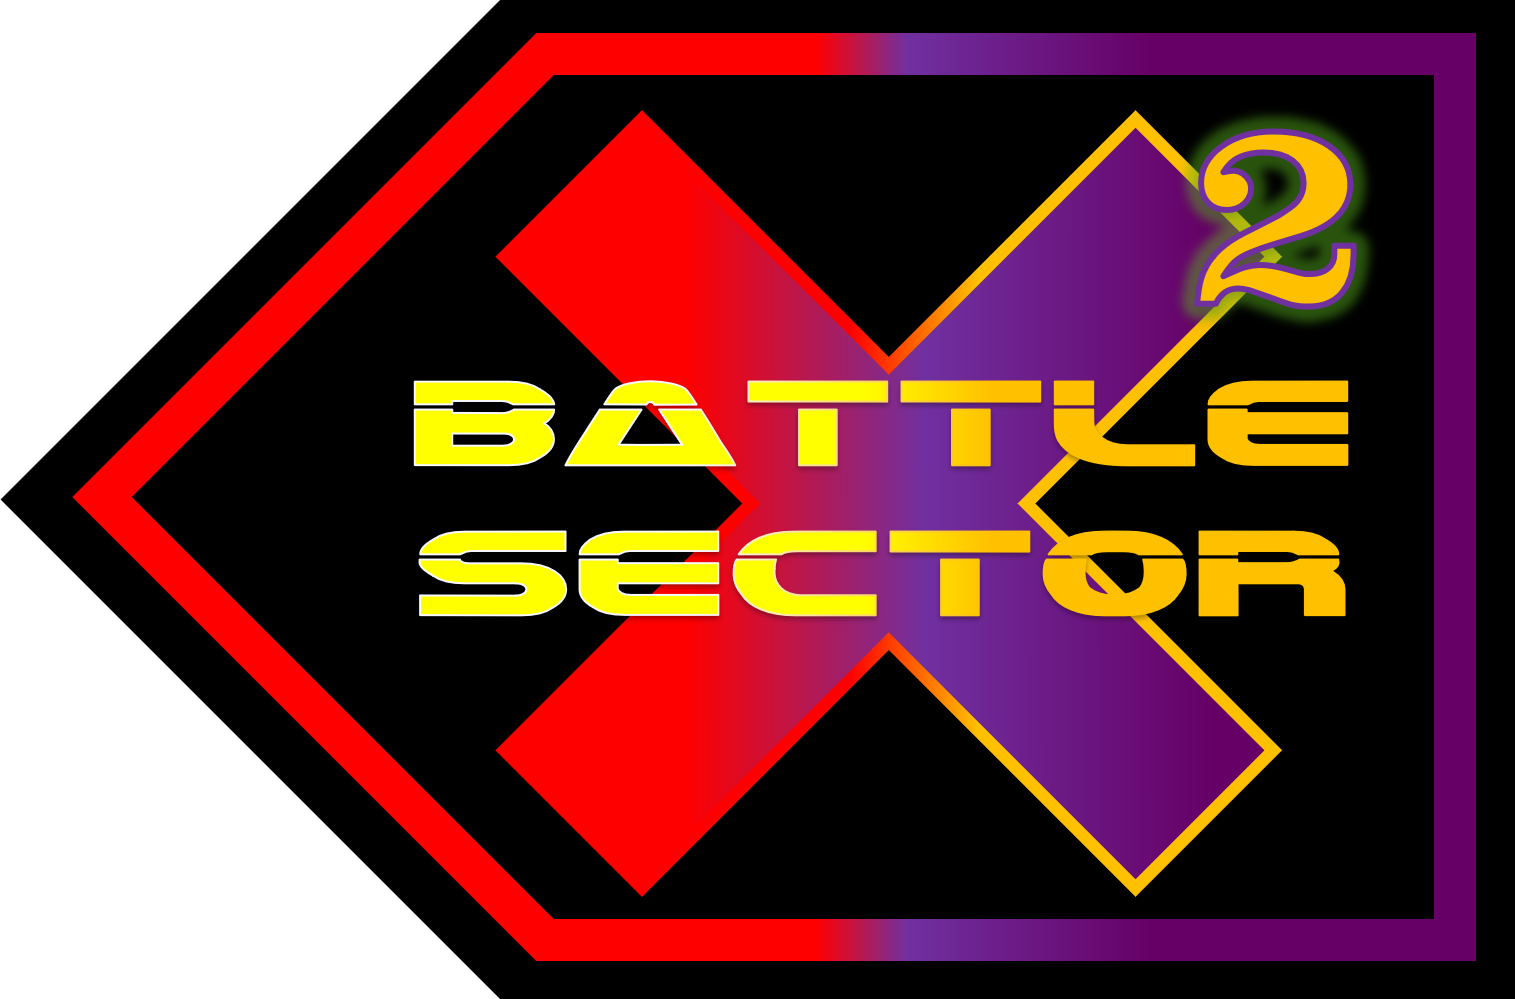 Go Home to Battle Sector X